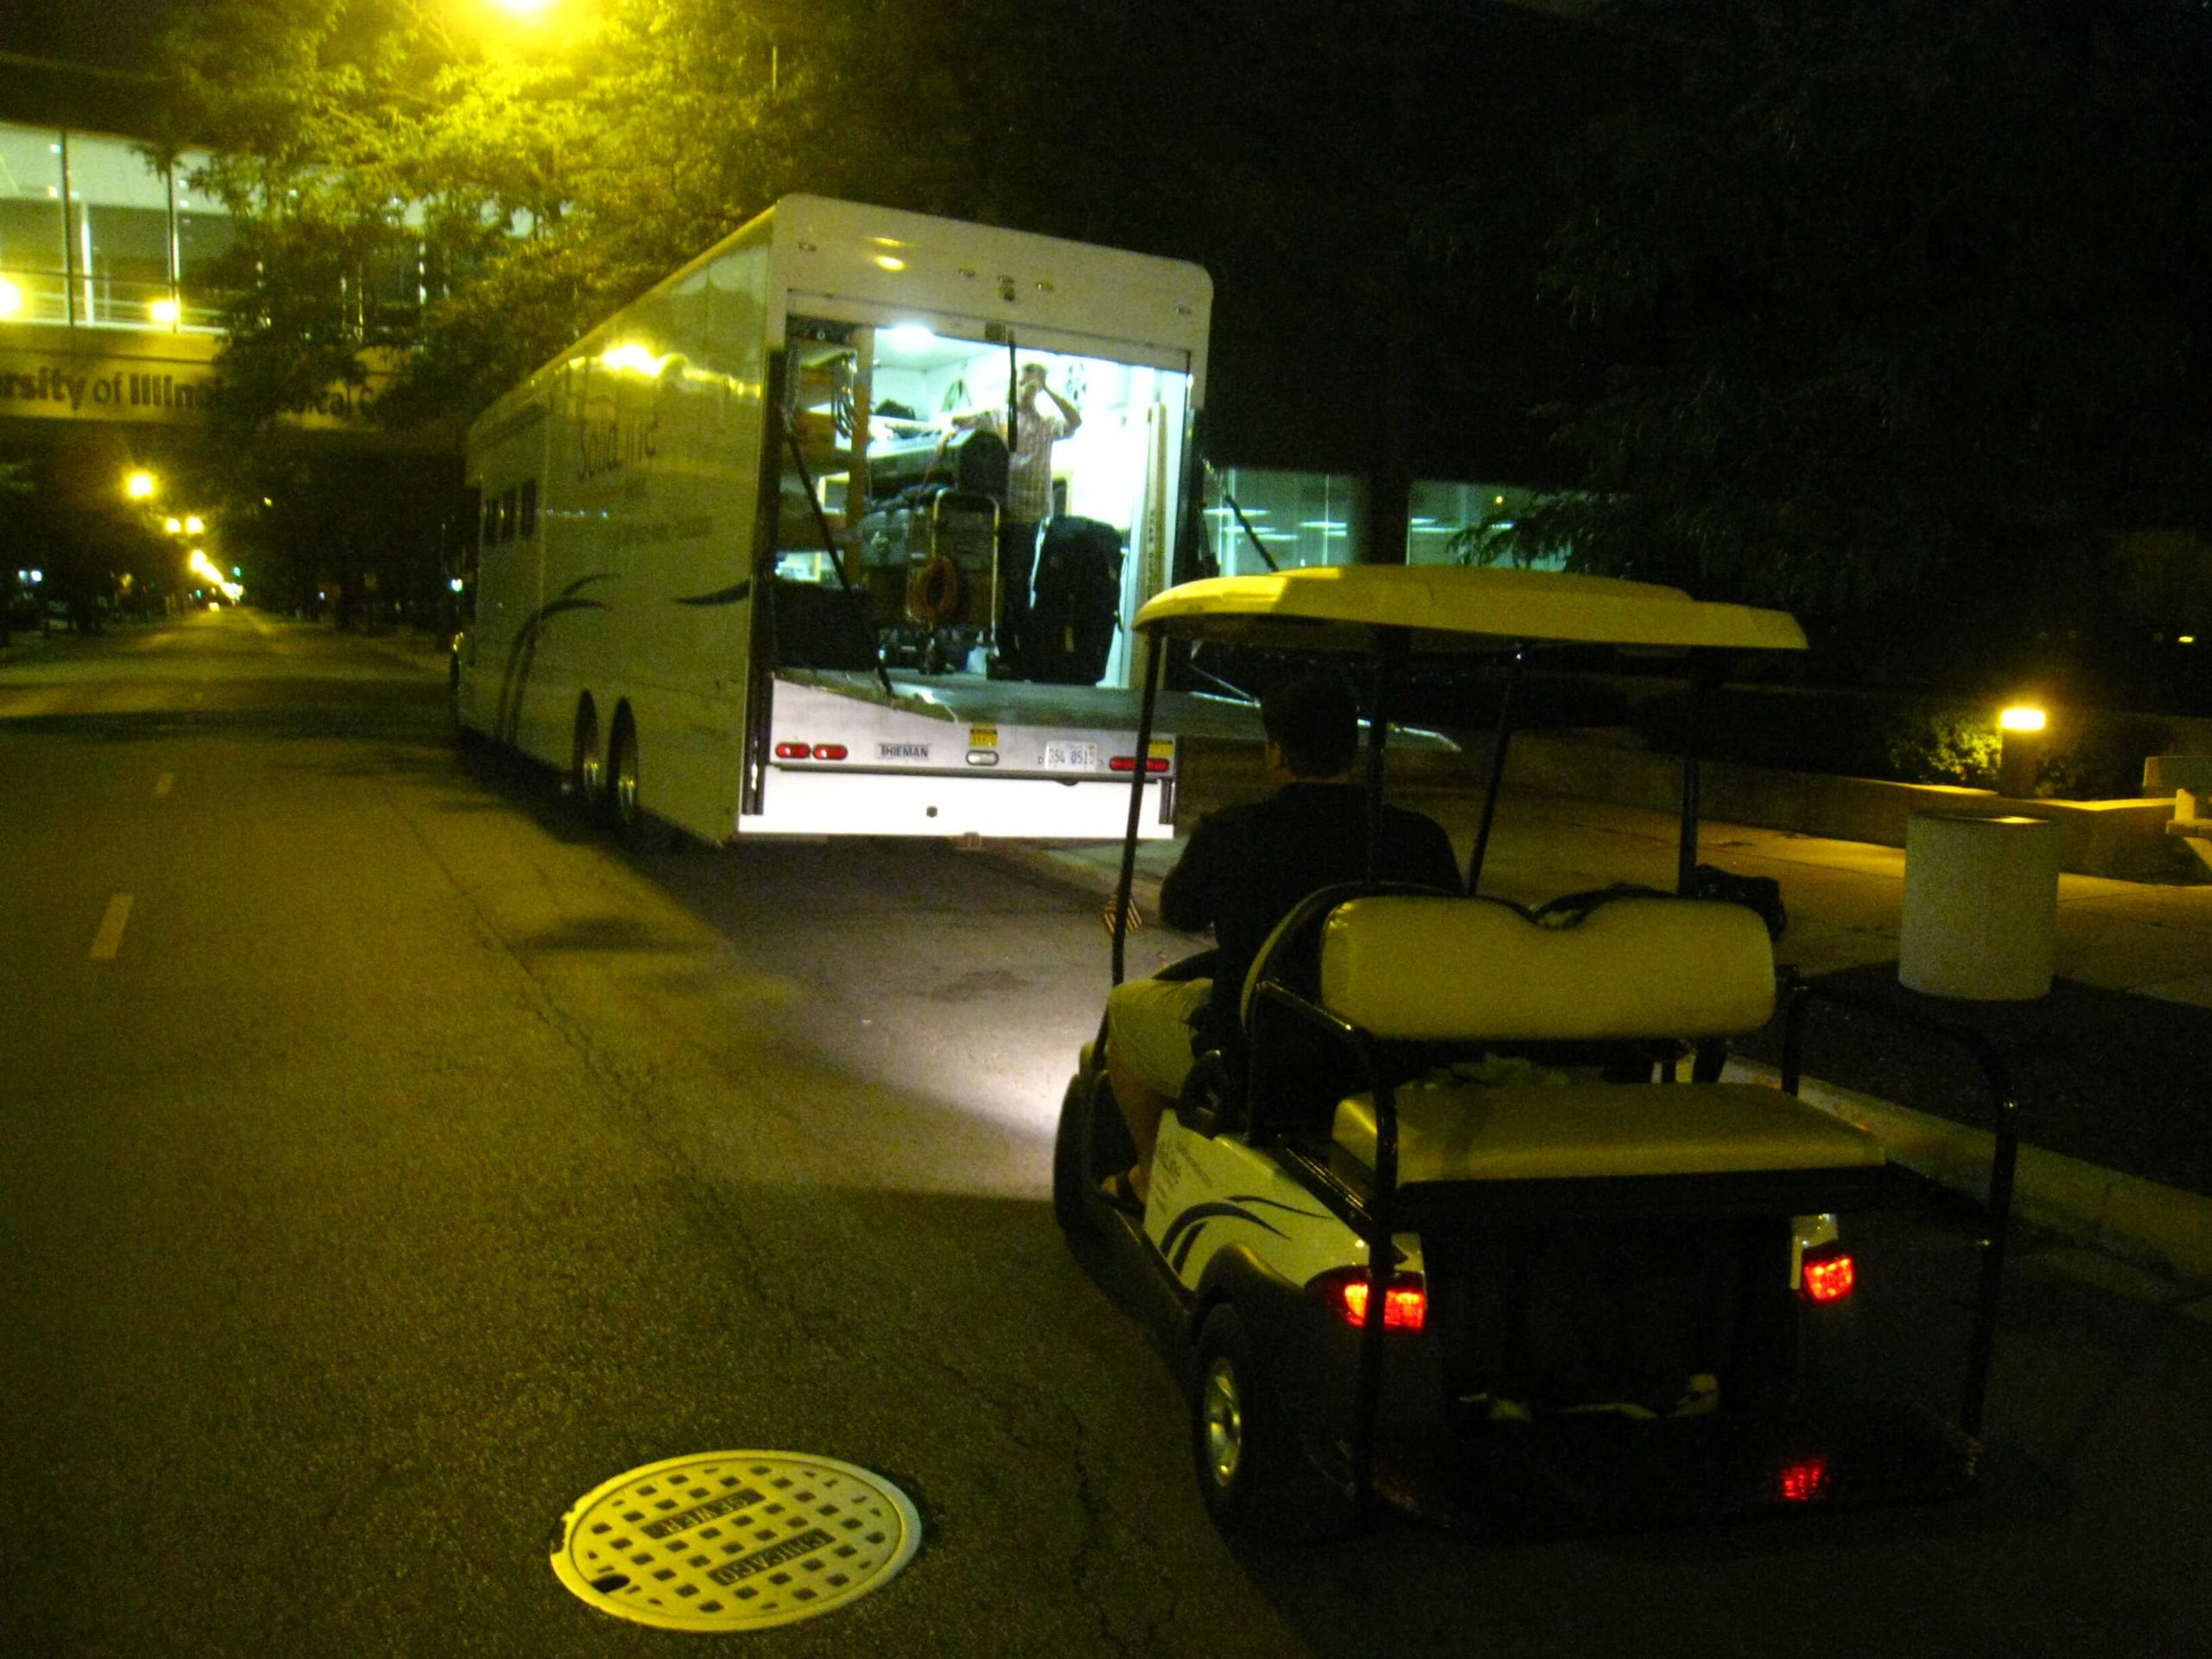 Loading up at 11pm after a 17 hour day of filming